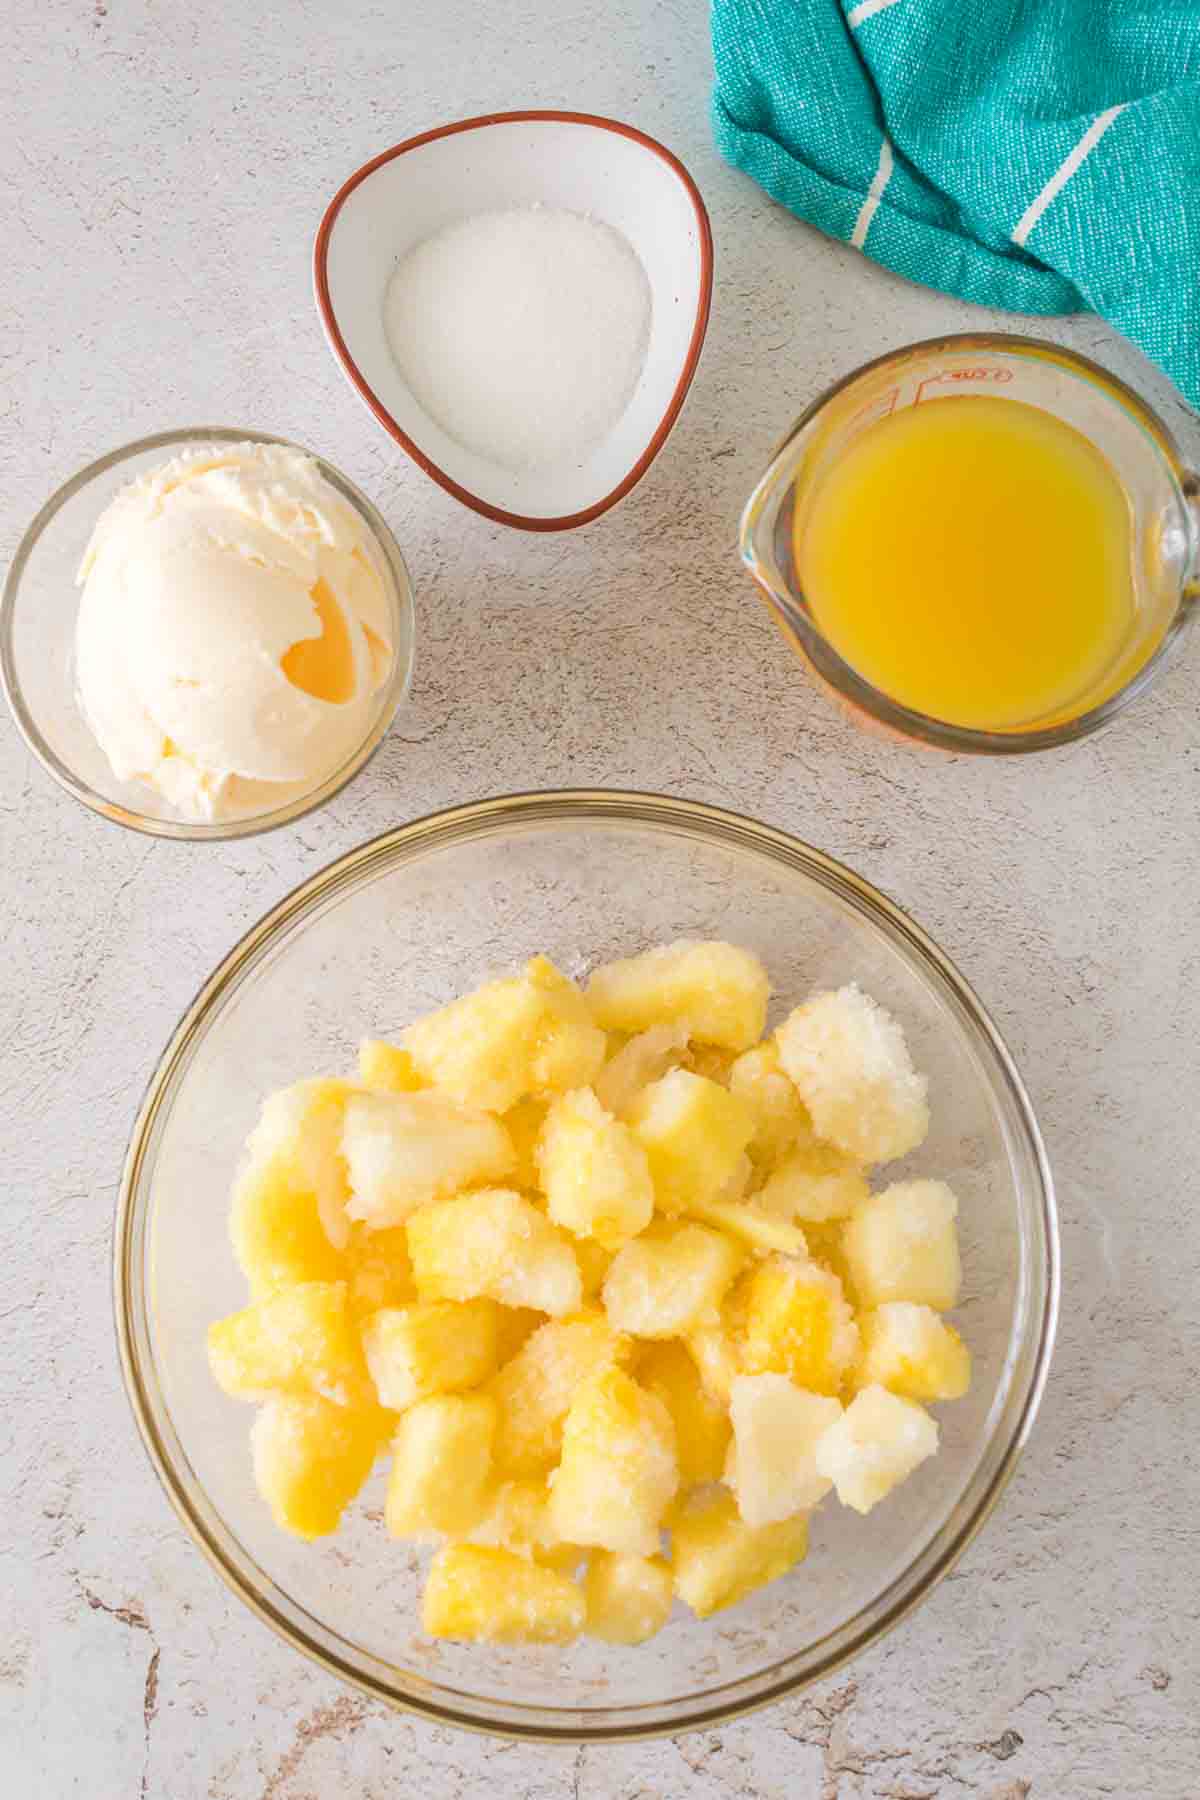 dole whip ingredients in mixing bowls